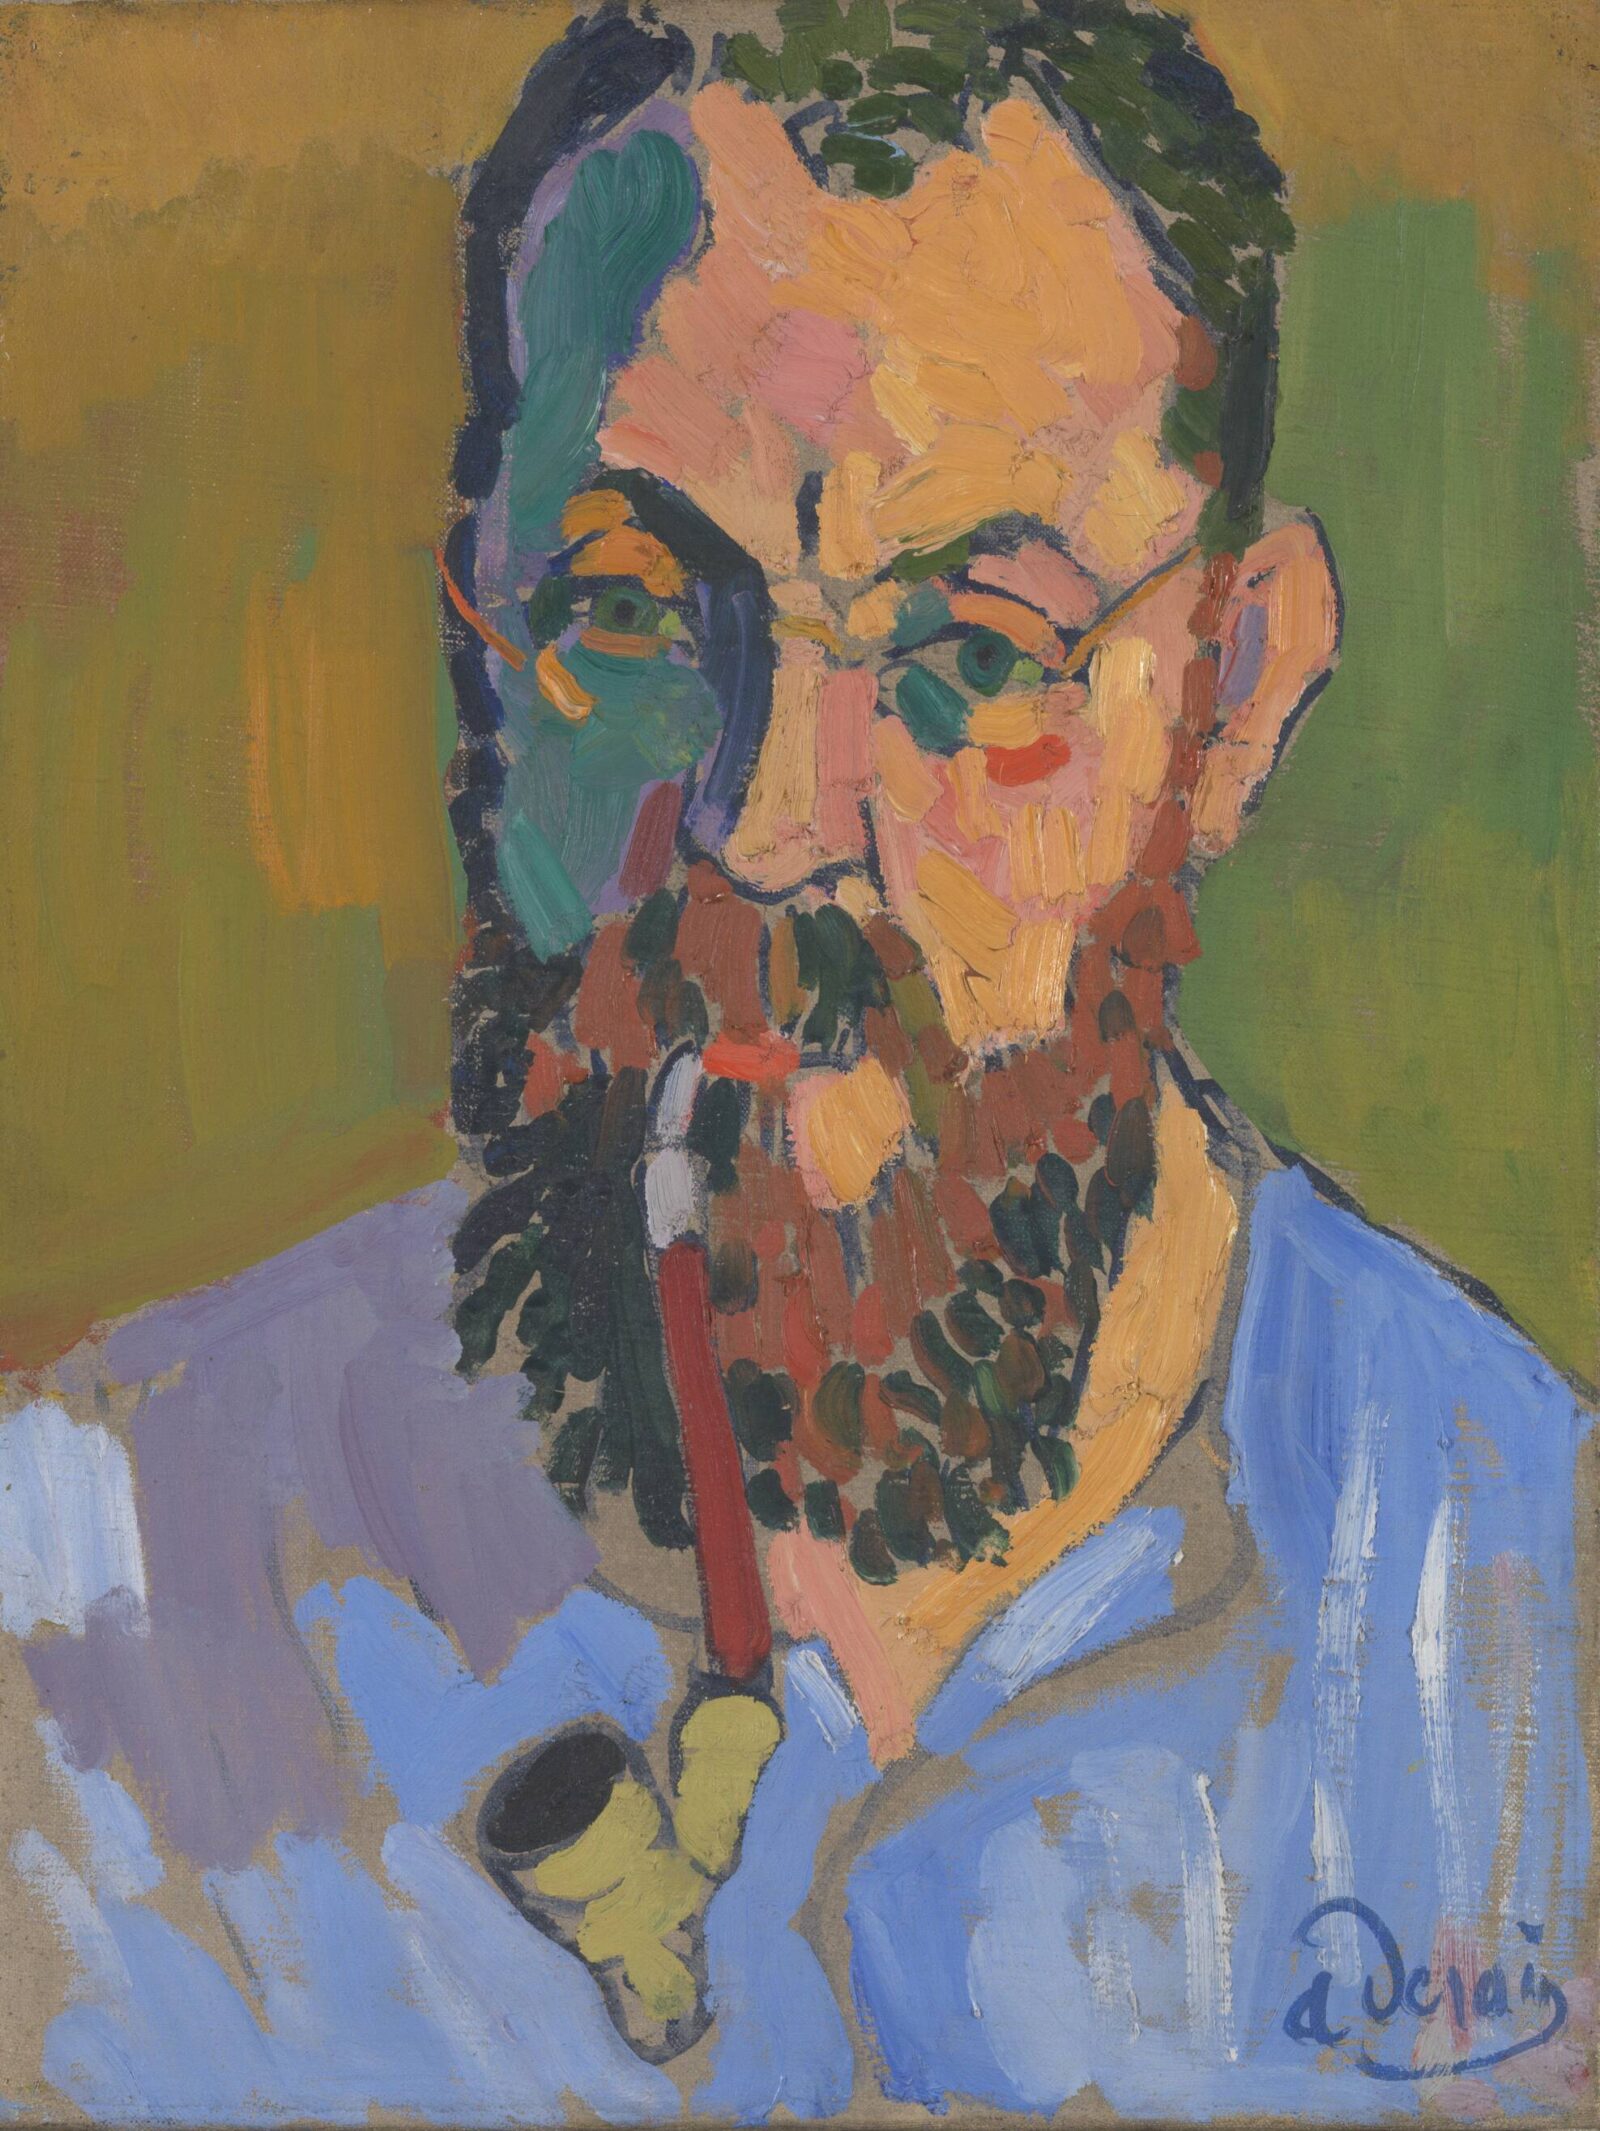 André Derain, Henri Matisse, 1905, oil on canvas, Tate, purchased 1958. © 2023 Artists Rights Society (ARS), New York / ADAGP, Paris